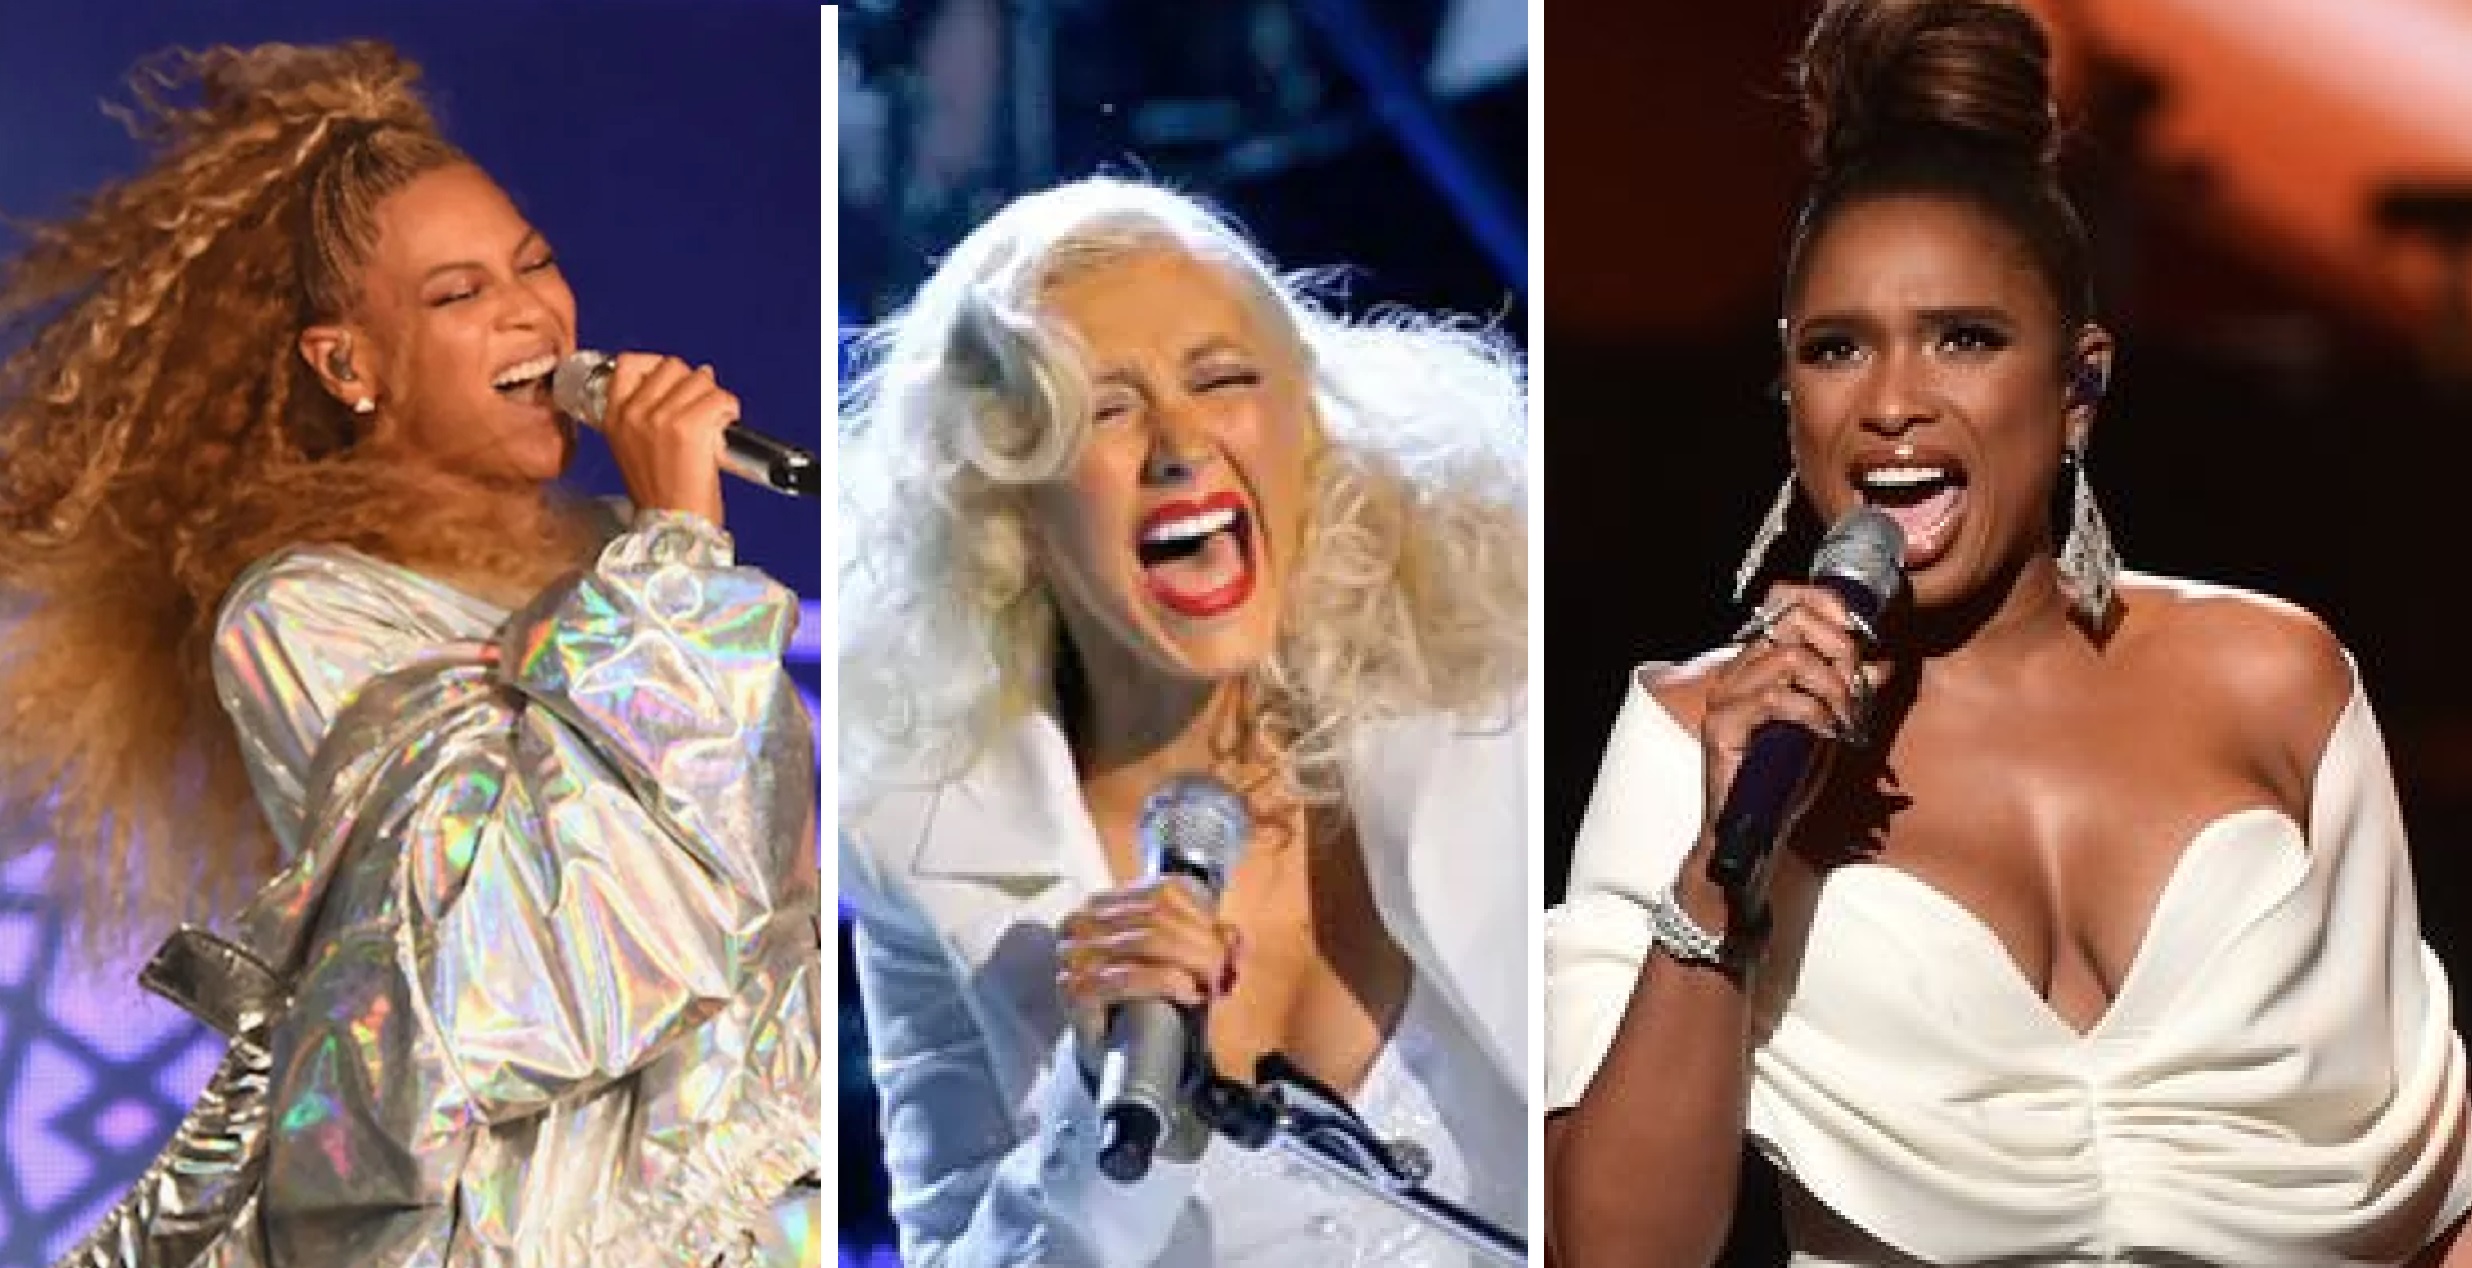 POLL: Who Is The Best Female Singer Of This Generation? Vote Here!